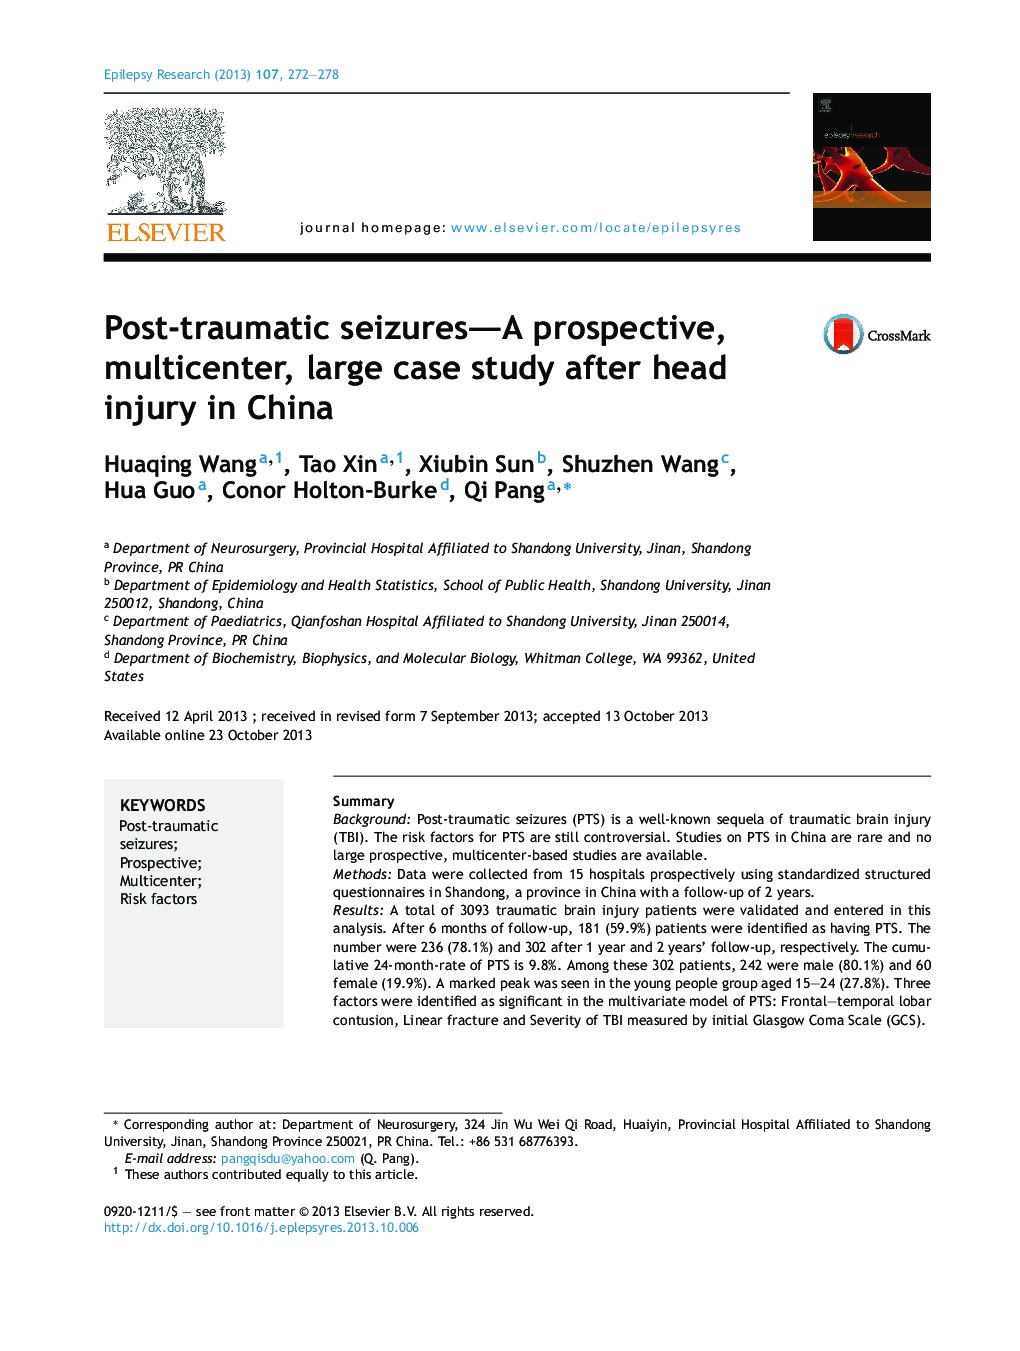 Post-traumatic seizures—A prospective, multicenter, large case study after head injury in China